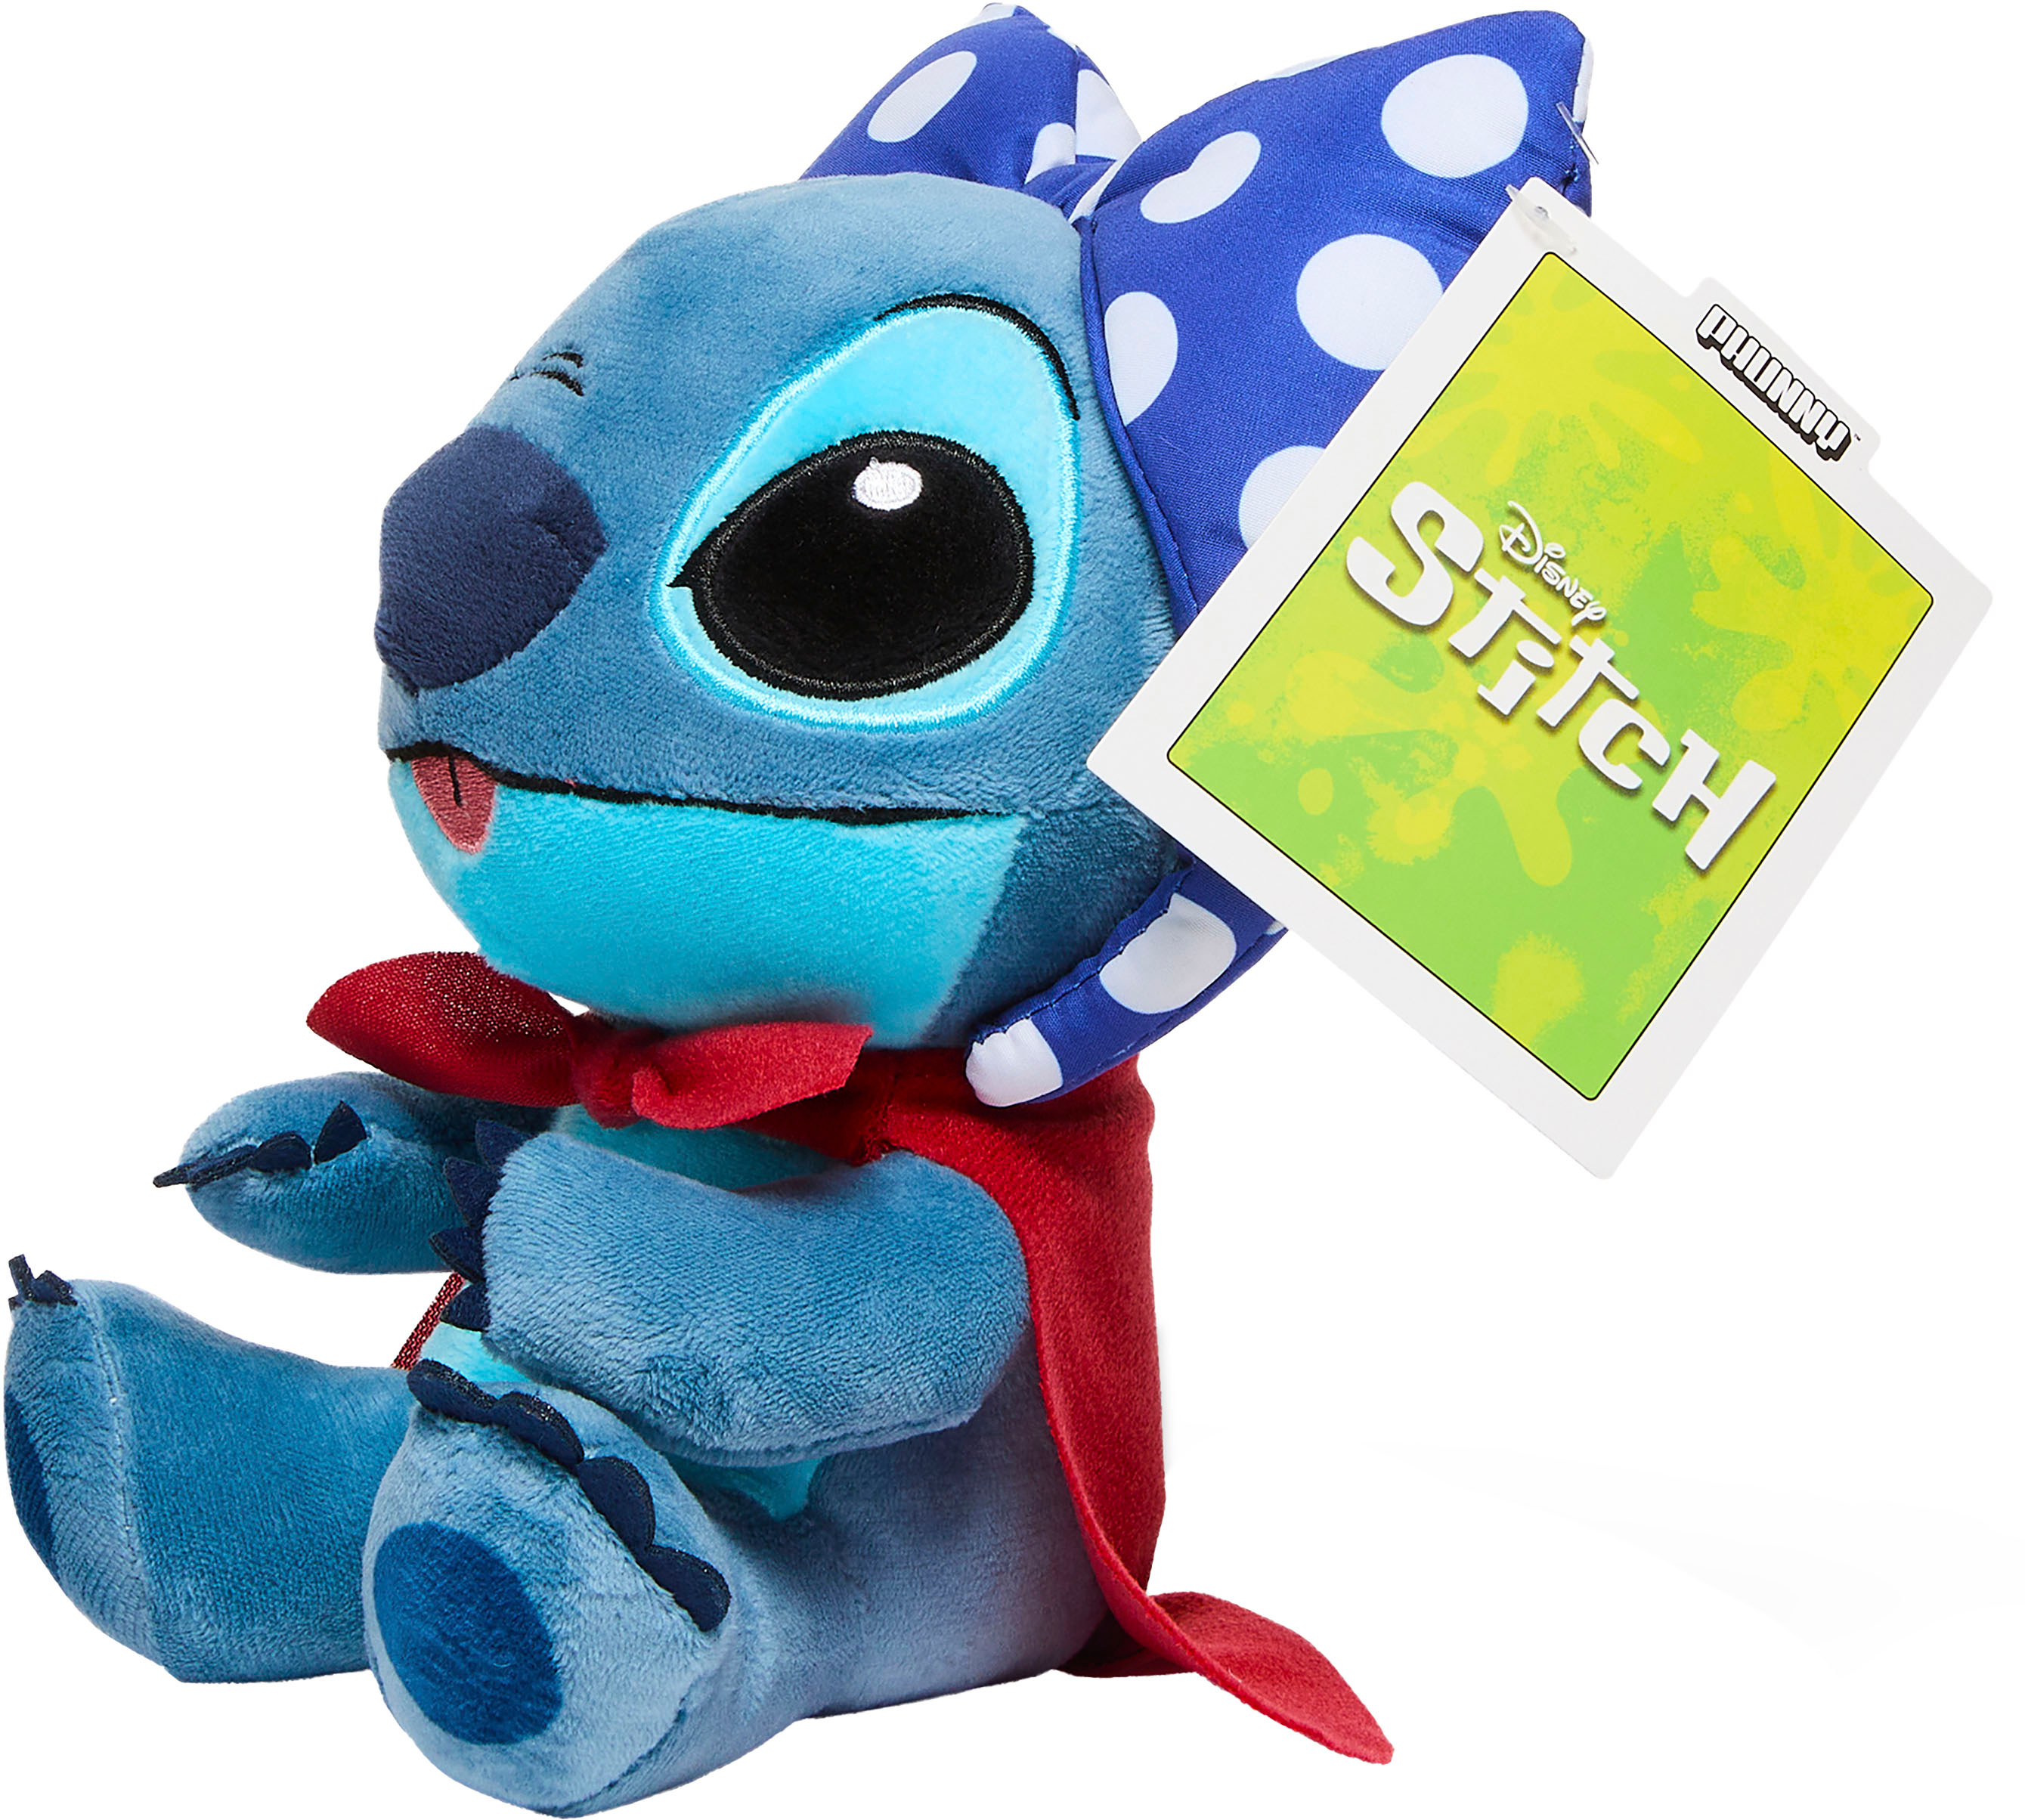 Official Lilo & Stitch Plush Toy 505430: Buy Online on Offer